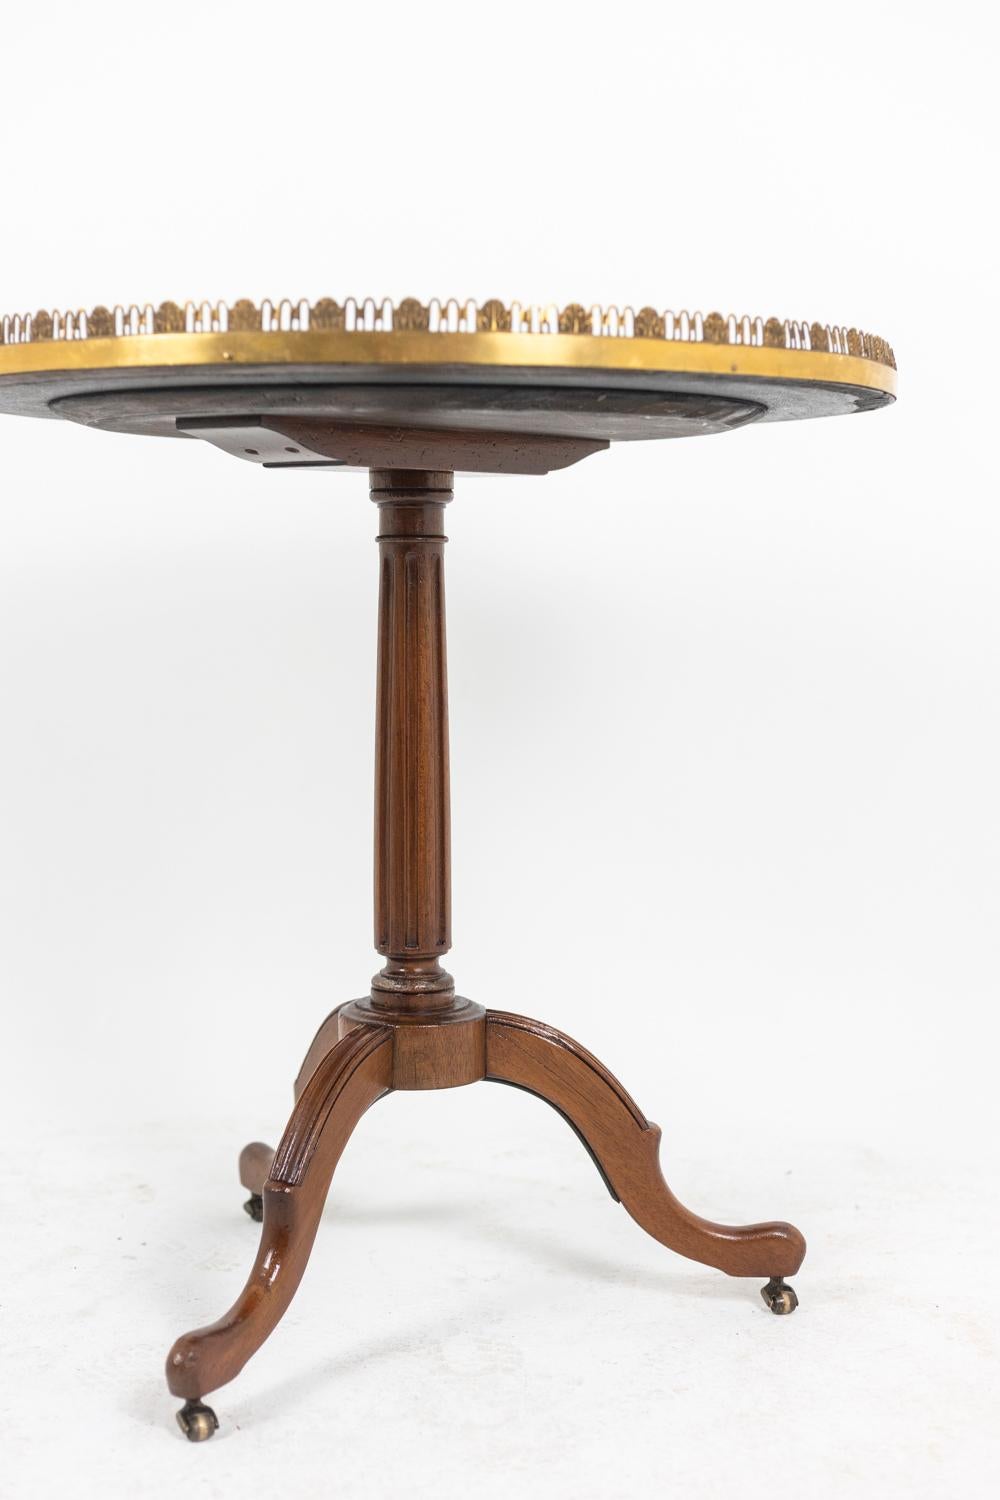 Pedestal table of Directoire style in mahogany, circular in shape. Top with white marble veined, openwork gallery in gilded bronze. Fluted foot. Tripod base standing on small wheels.

French work realized circa 1900.

Dimensions : H 72 x D 70